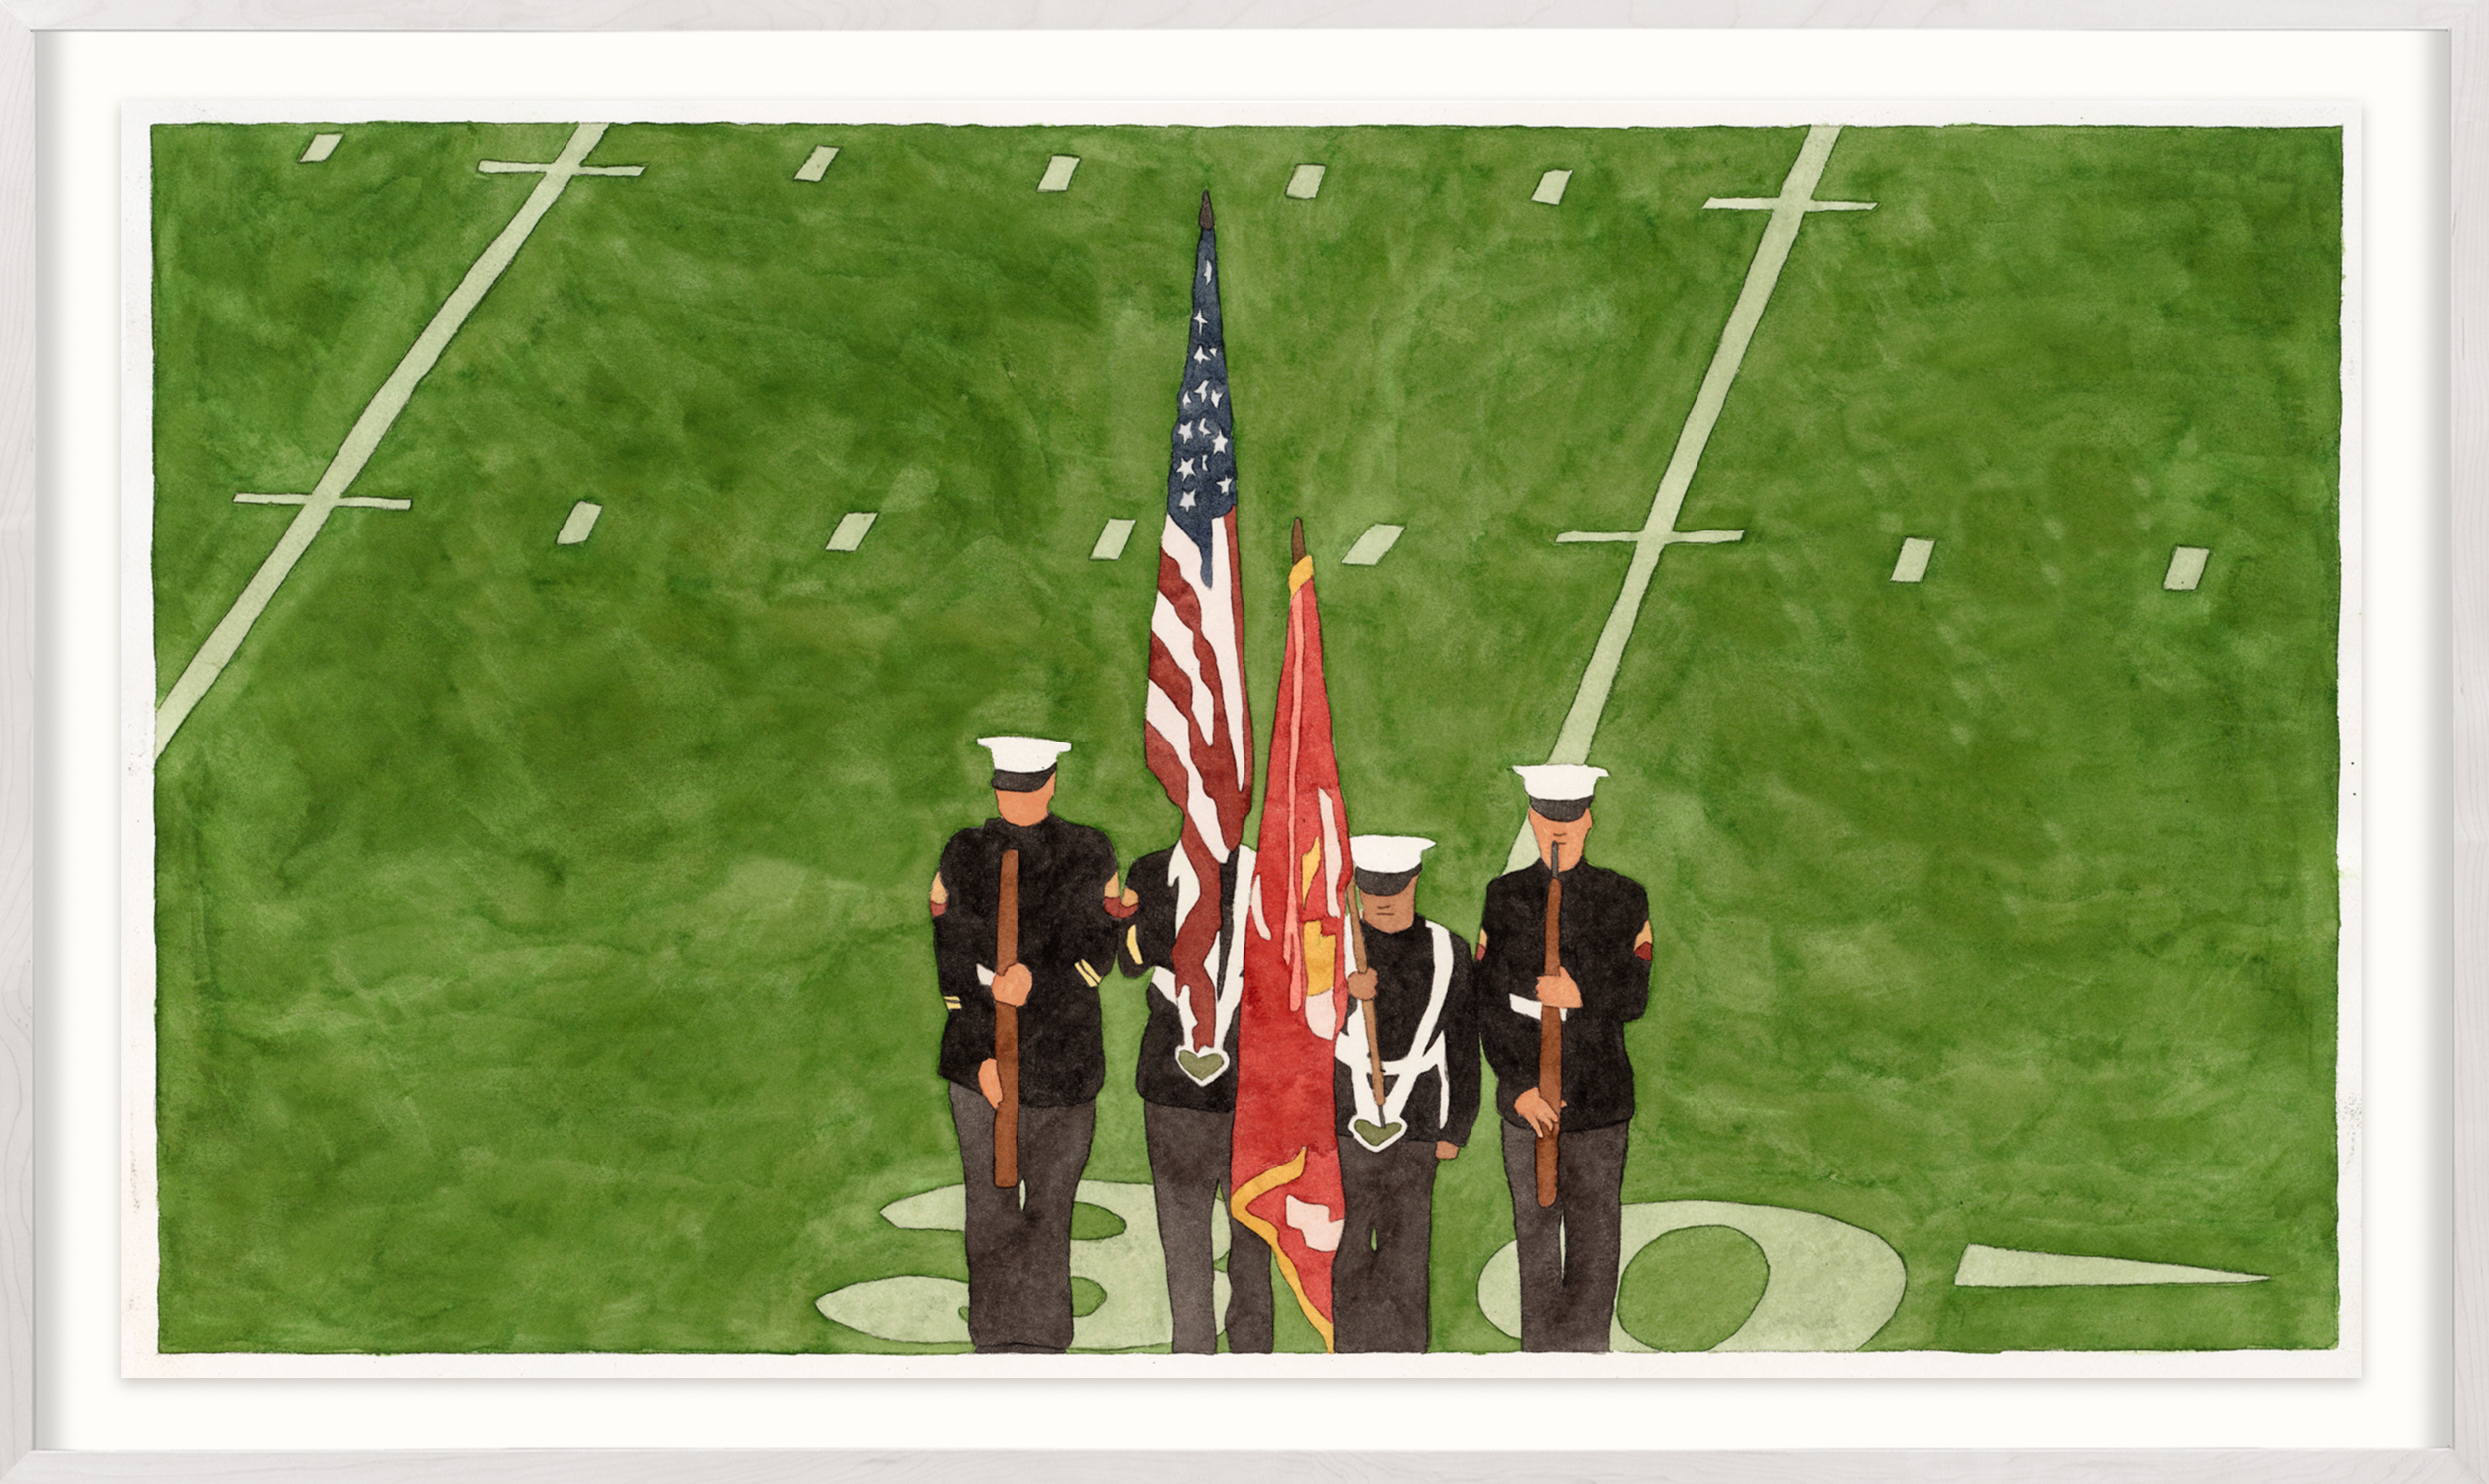 A color image of a framed watercolor painting depicting four service members with flags during the national anthem